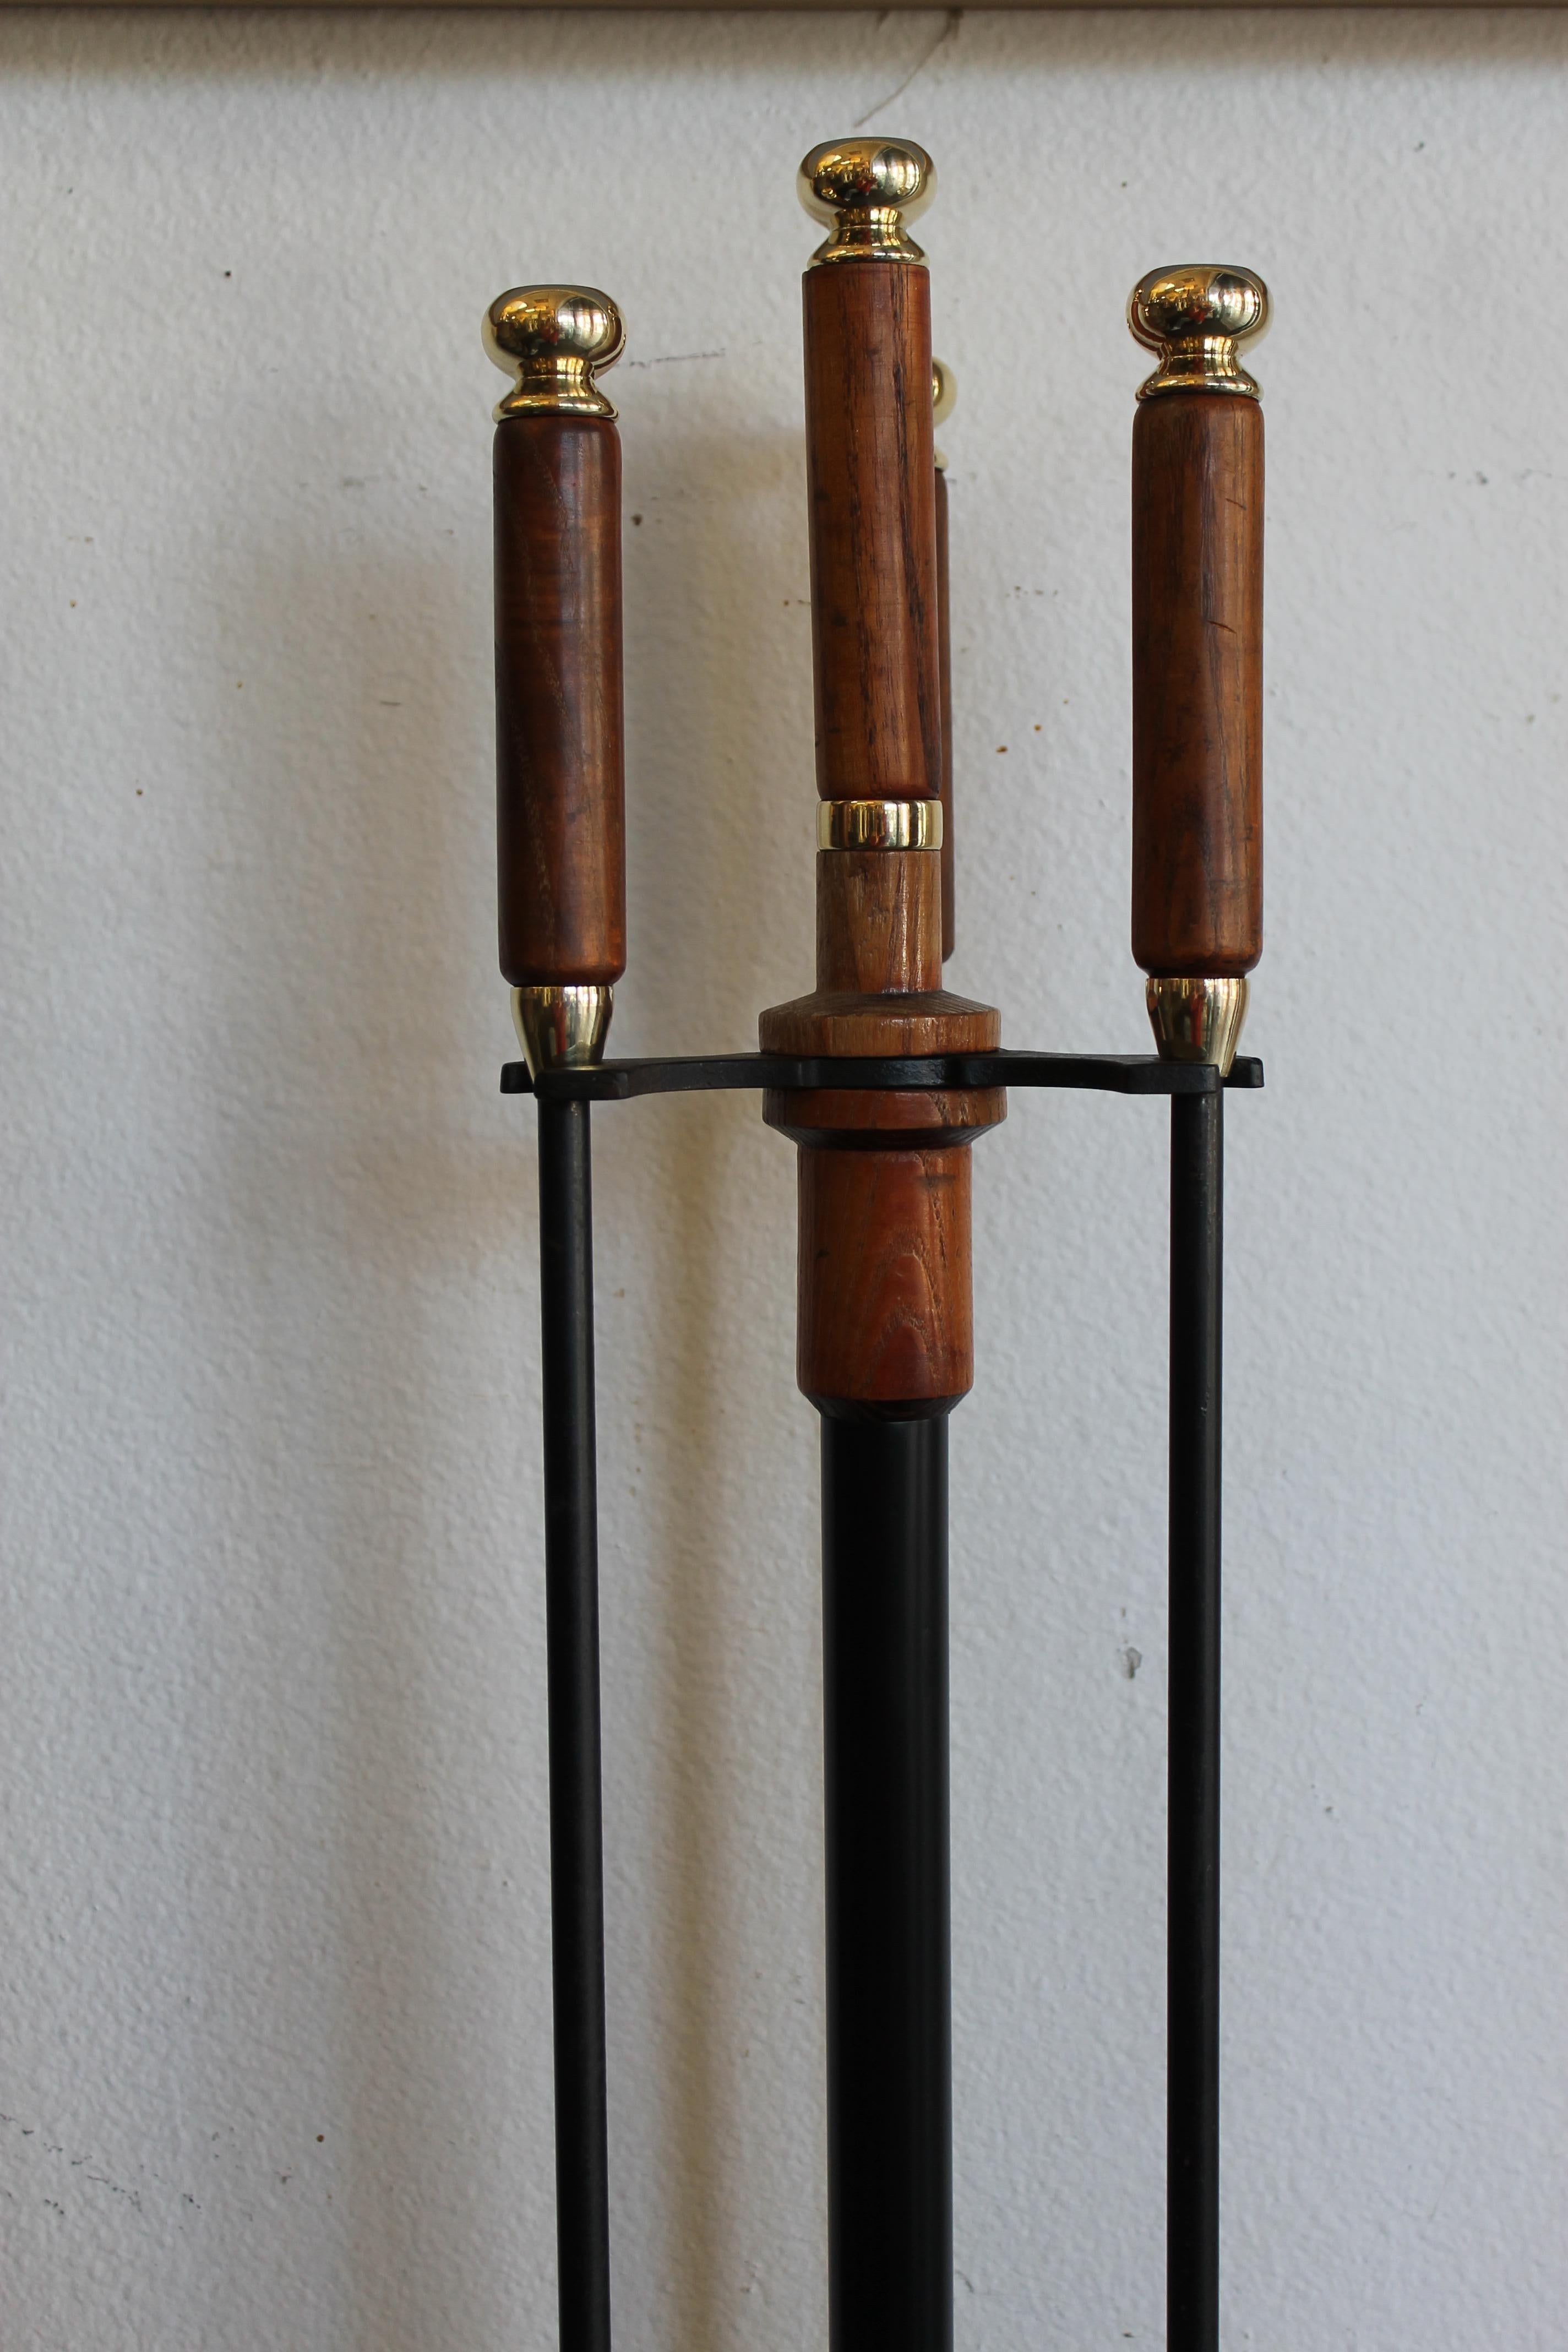 Elegant brass and wood midcentury fireplace fire tools. We polished the brass portions of the fireplace set. Total height with fire tools in place is 36.5”. Base is 11” wide x 8” deep. Tools are about 33” high.